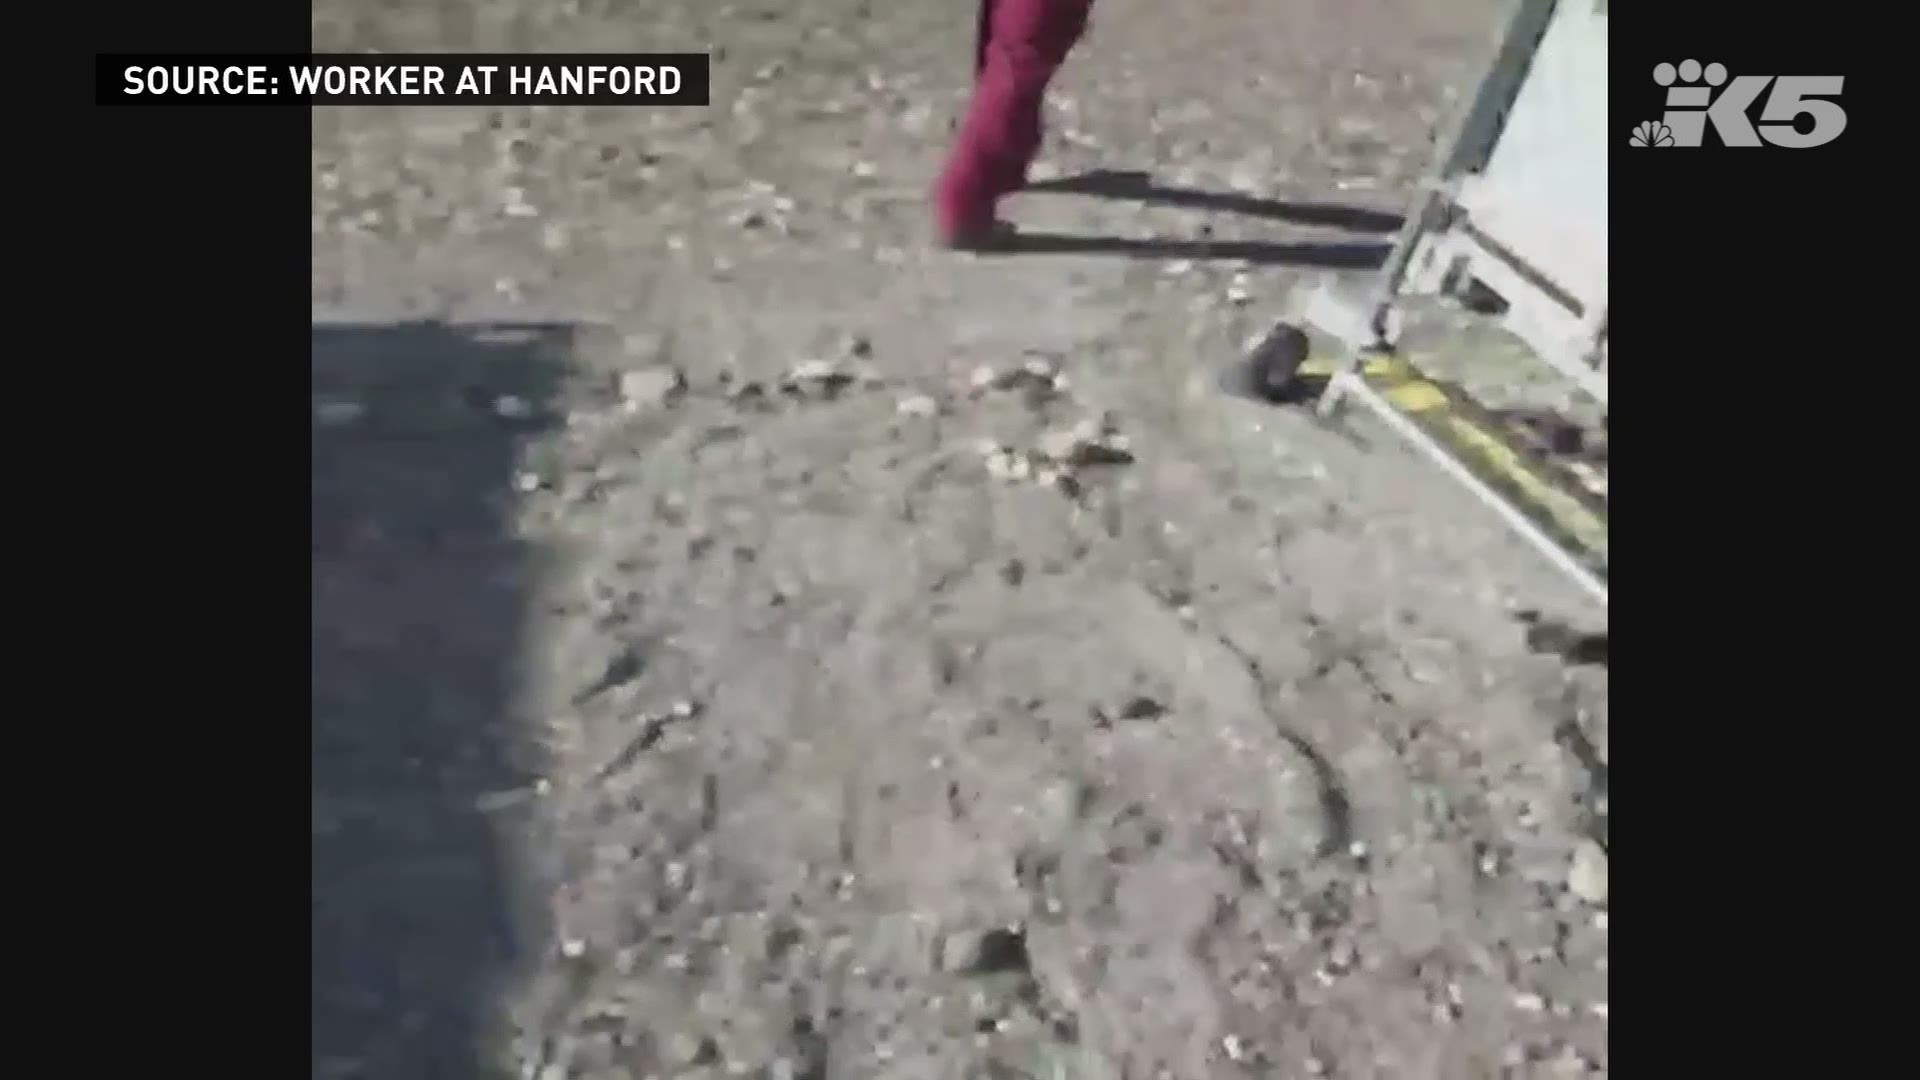 This is raw video from a worker at Hanford.